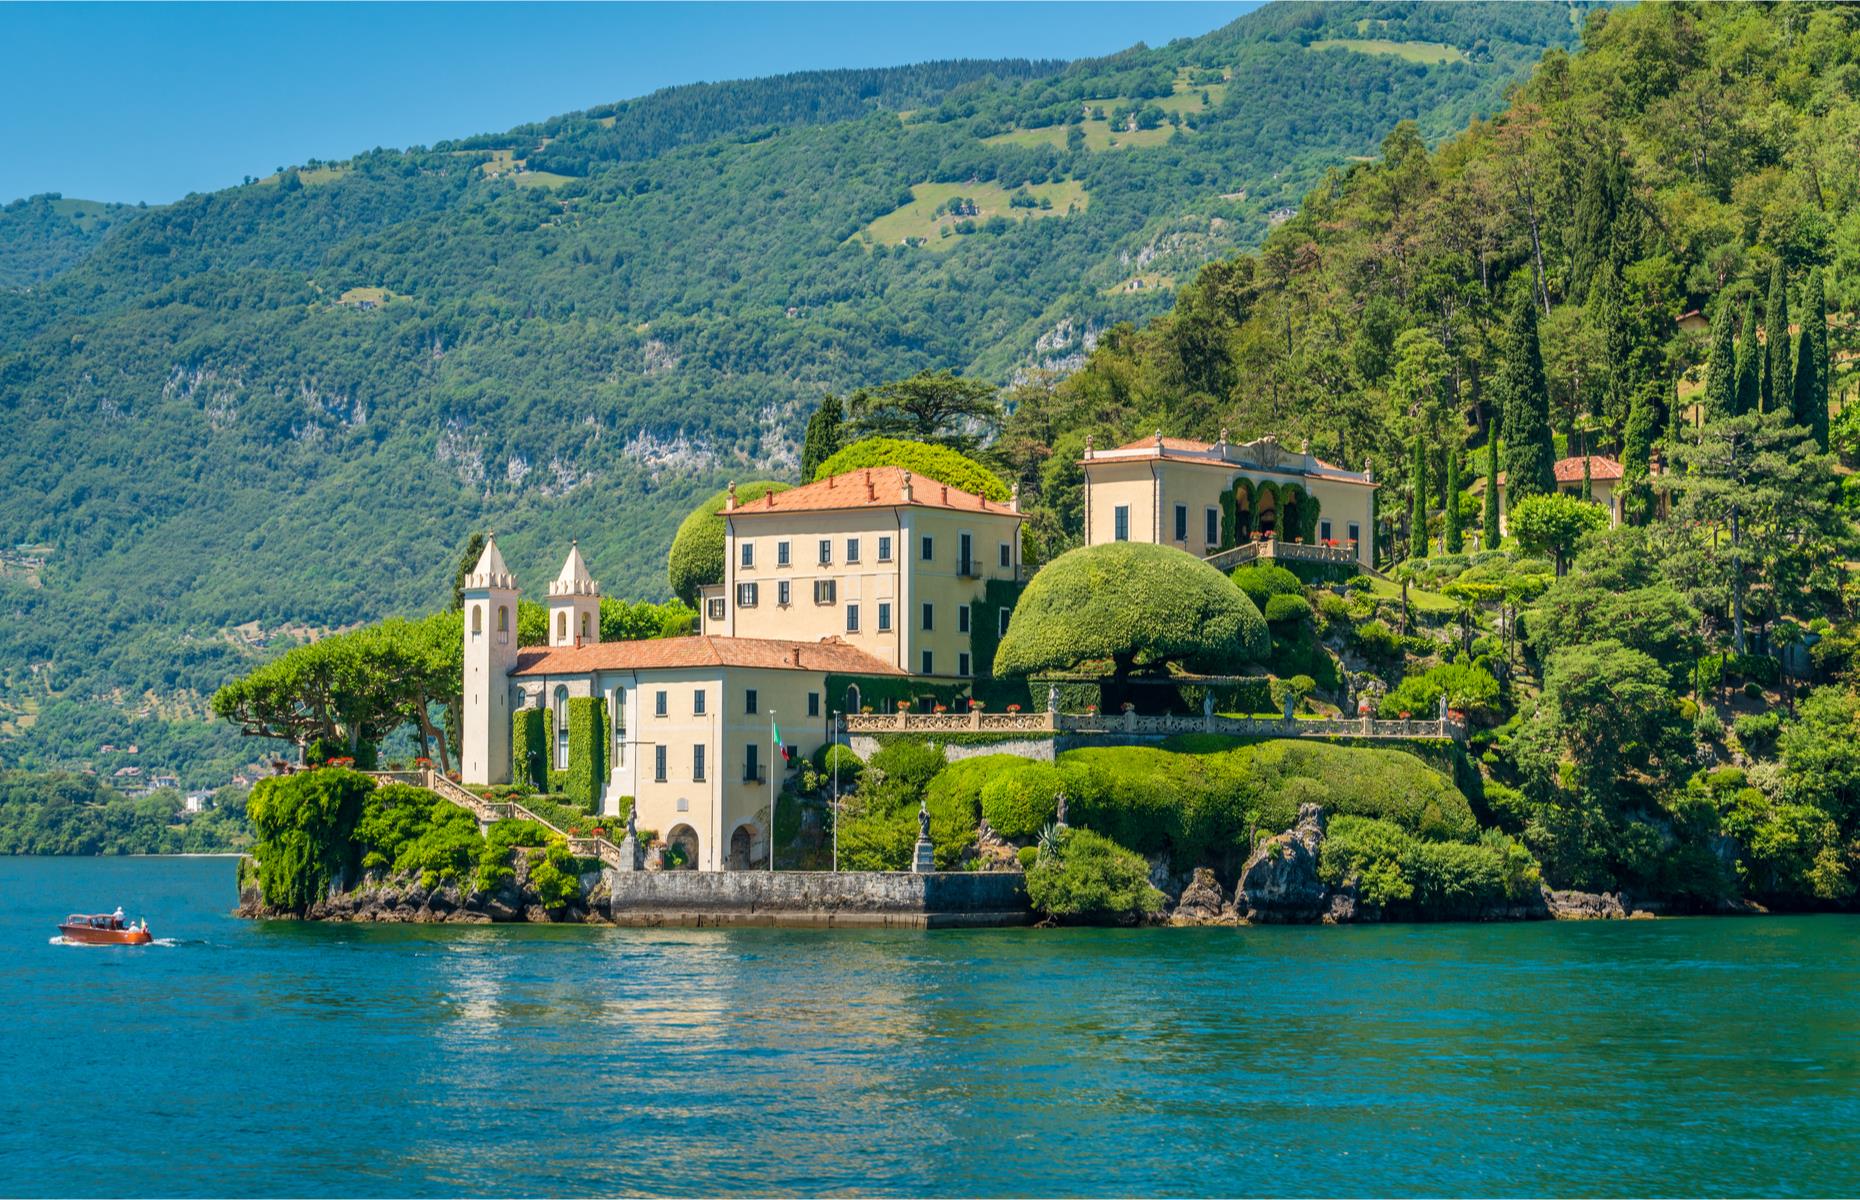 <p>Italy and its beautiful lakes have been the location for many of Bond’s escapades. Magnet for the rich, the famous and for super villains too, Lake Como made a suitably glam appearance in 2006’s <em>Casino Royale</em>. The lake’s deep blue waters are backed by the Alps and its wooded shores are home to numerous ritzy residences, including the opulent Villa Balbianello (pictured). Sitting on a promontory on the western shore, the villa's beautiful terraced gardens were the location for several scenes (it can be visited on <a href="https://lakecomotravel.com/villa-balbianello-lake-como/">guided tours</a>). Villa La Gaeta in San Siro, a private 1920-era mansion built to resemble a medieval castle, also appears as the setting for Bond's climactic battle with Mr White. </p>